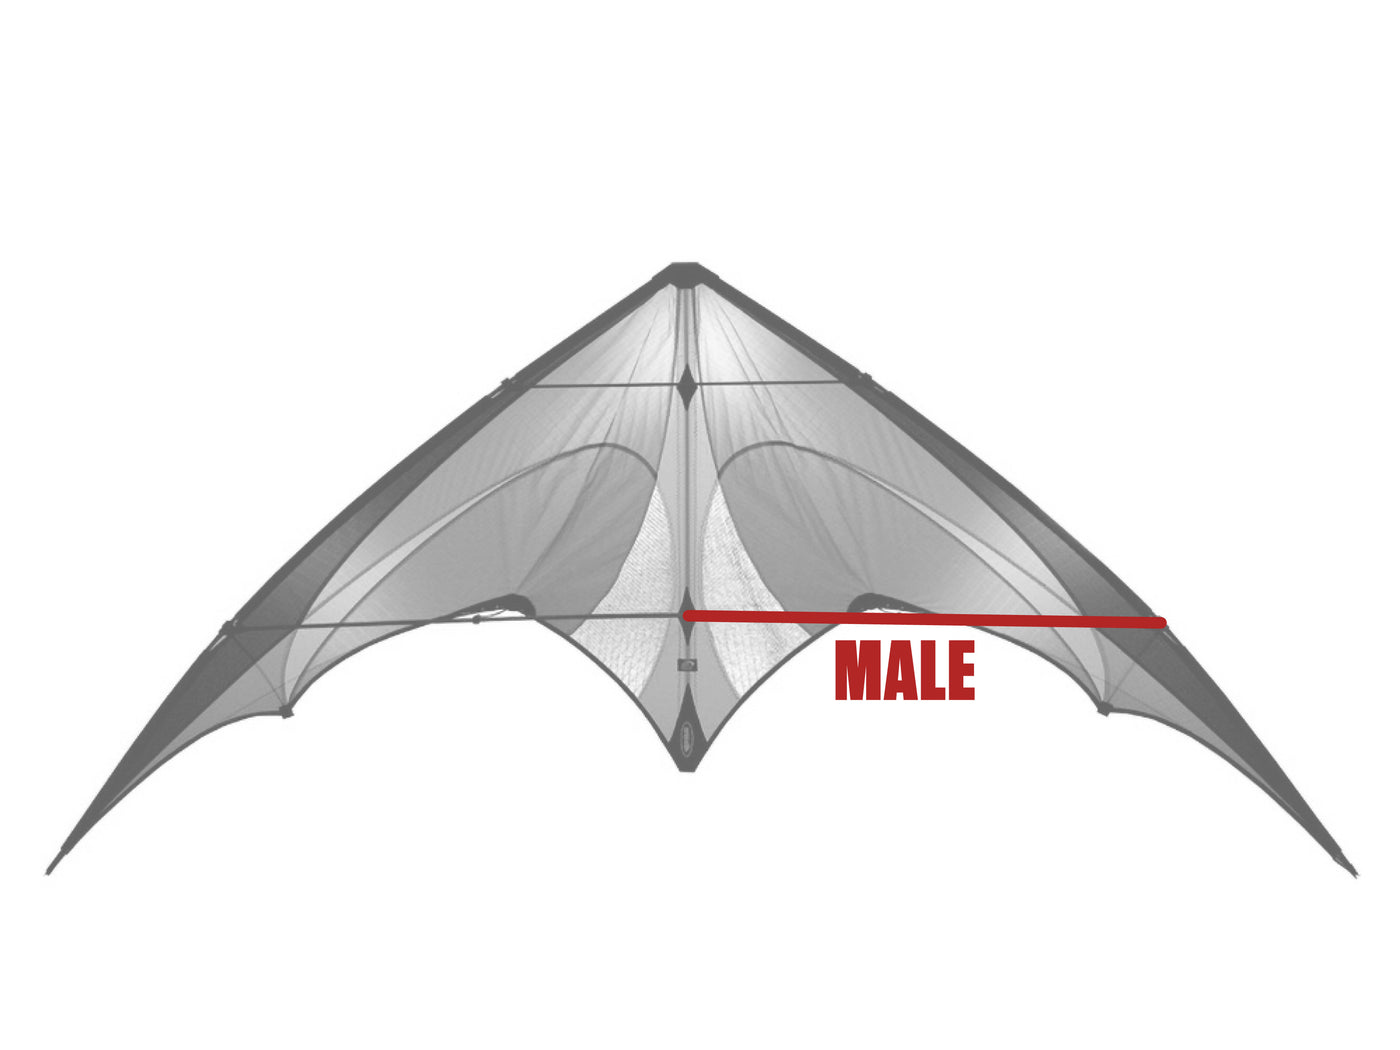 Diagram showing location of the E2 Lower Spreader (Male) on the kite.